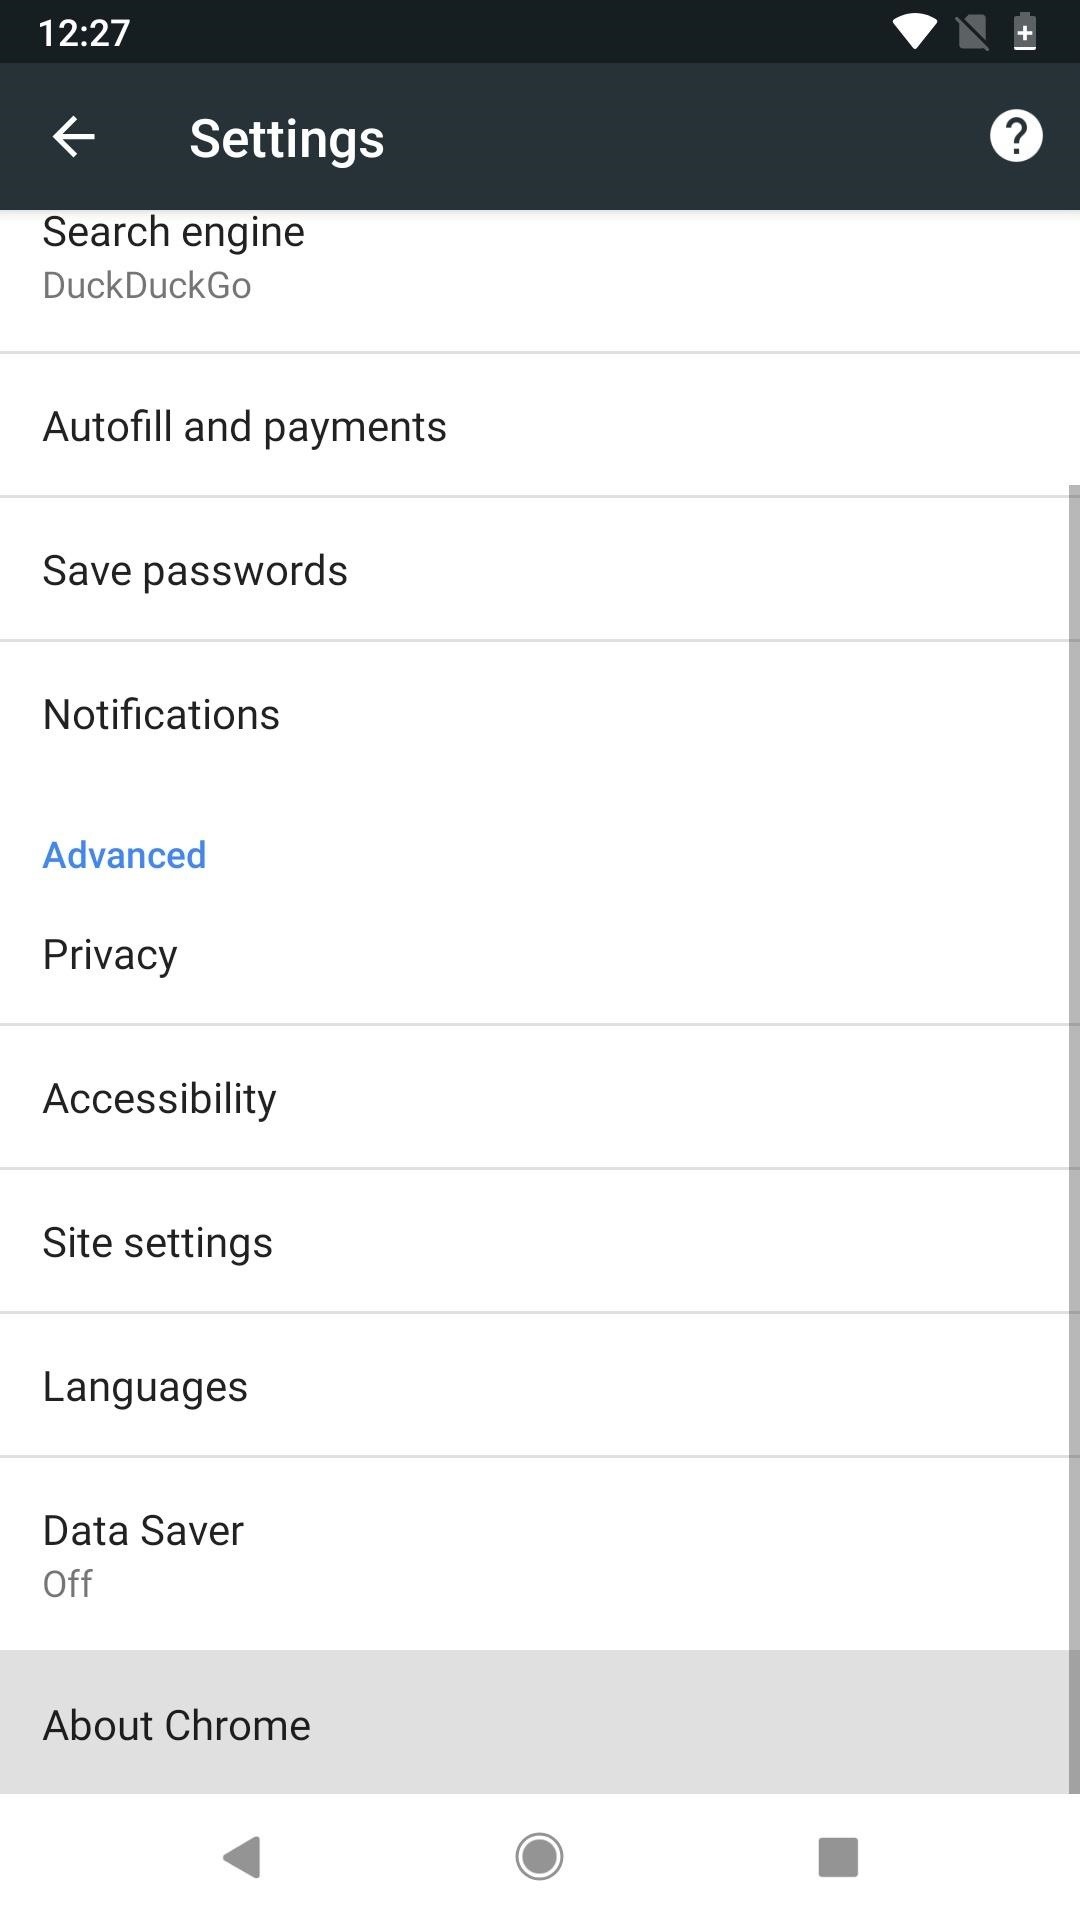 How to Move Chrome's Address Bar to the Bottom of Your Screen on Android